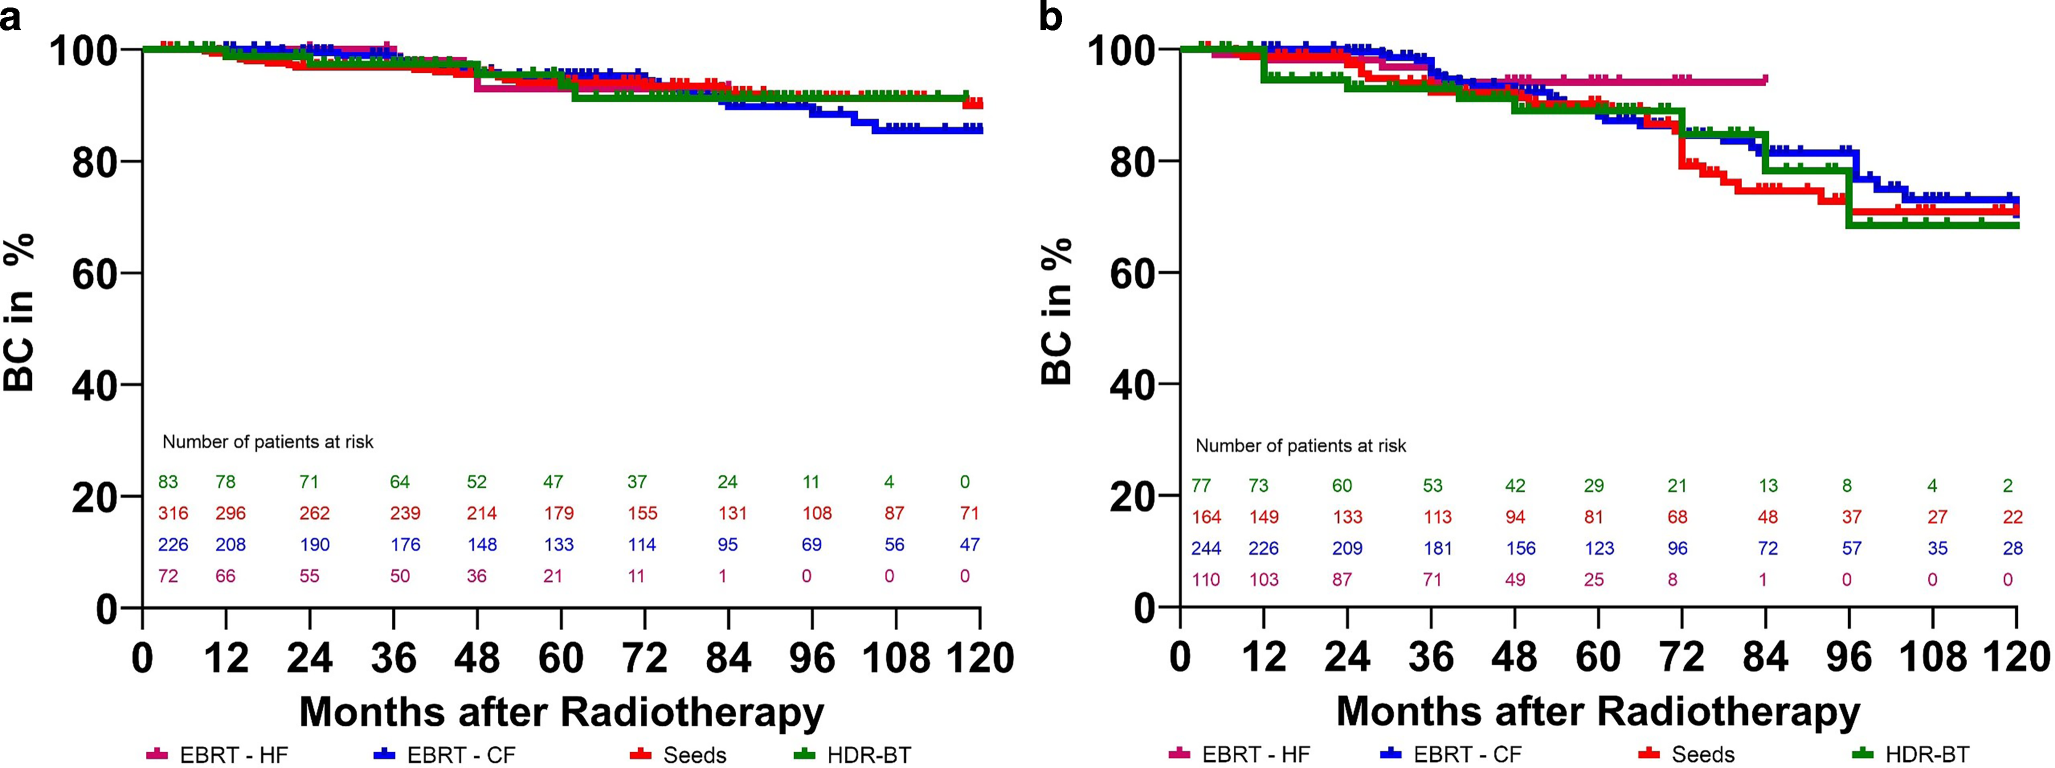 Radiotherapy in localized prostate cancer: a multicenter analysis evaluating tumor control and late toxicity after brachytherapy and external beam radiotherapy in 1293 patients